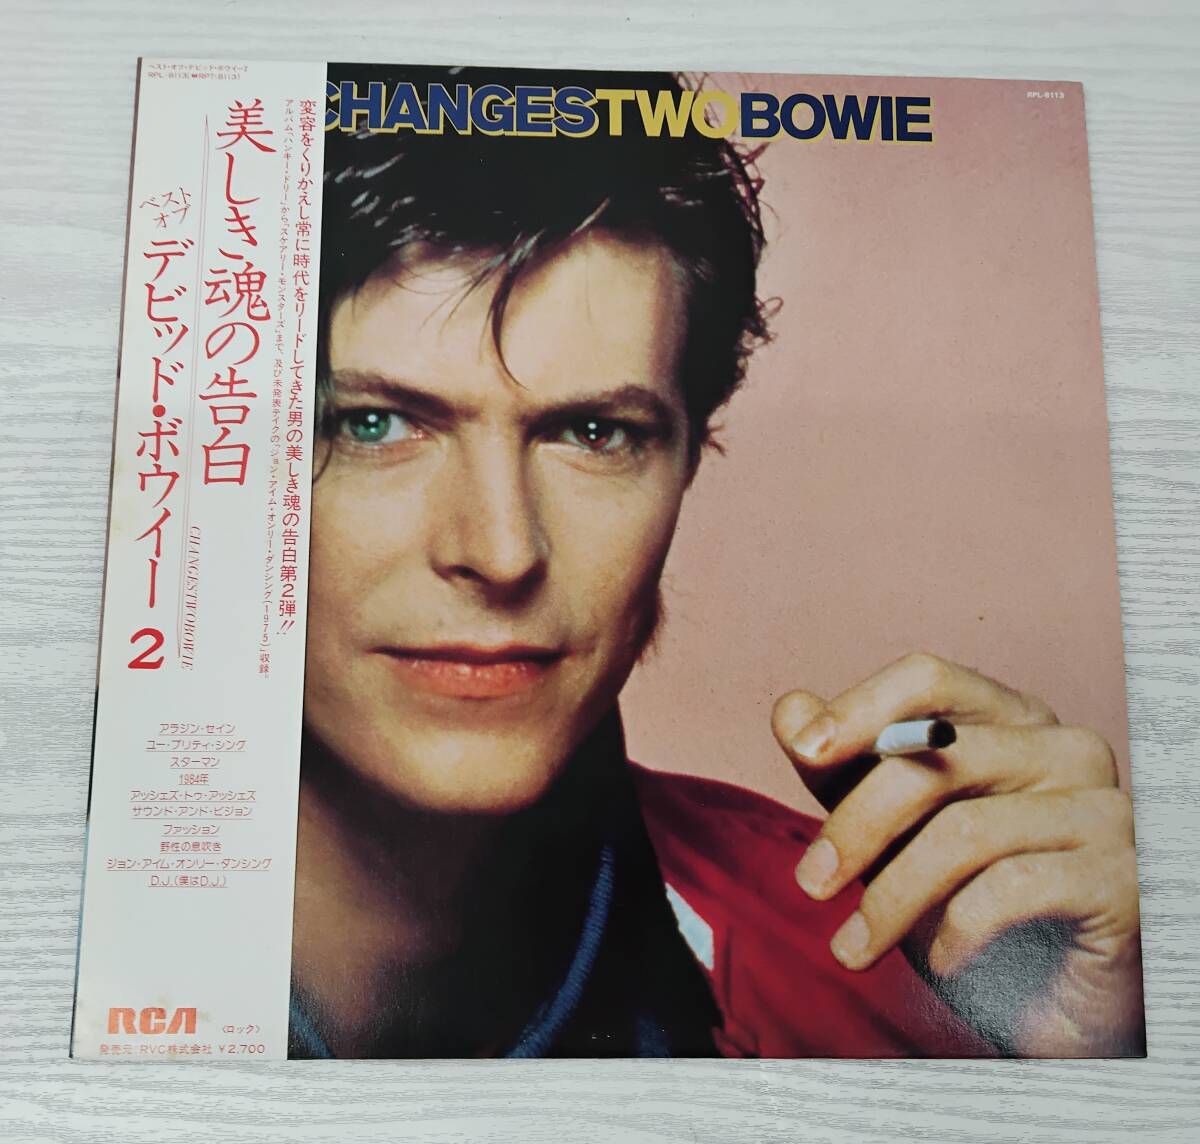 LP　デビッド・ボウイー david bowie　美しき魂の告白 2 changes two bowie　洋楽　試聴未確認　中古　ジャンク_画像2